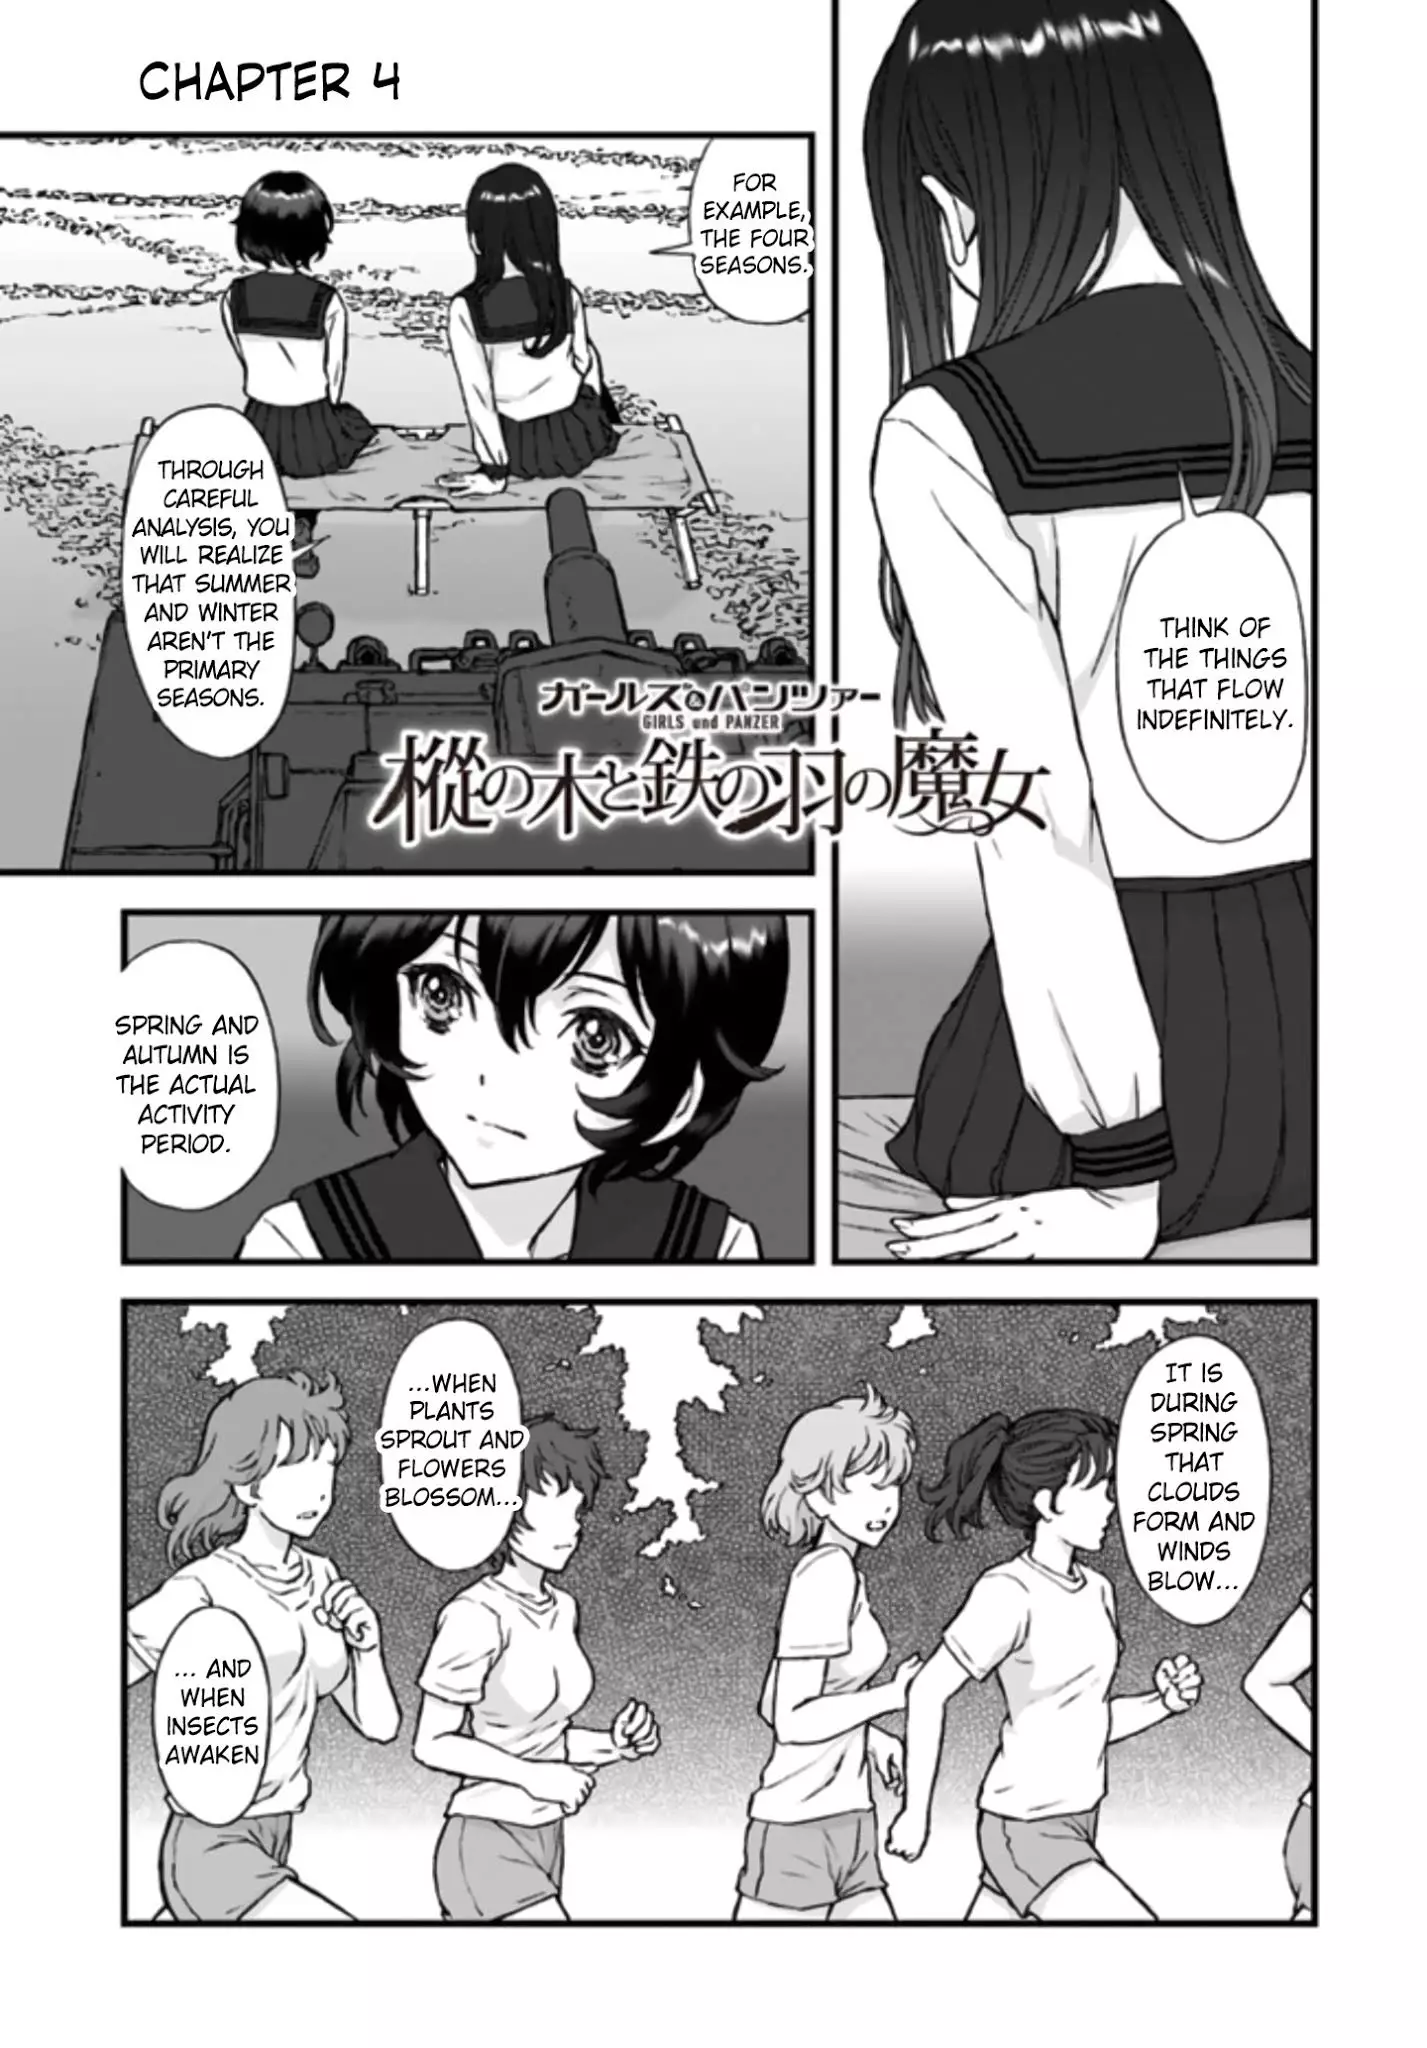 Girls Und Panzer - The Fir Tree And The Iron-Winged Witch - 4 page 1